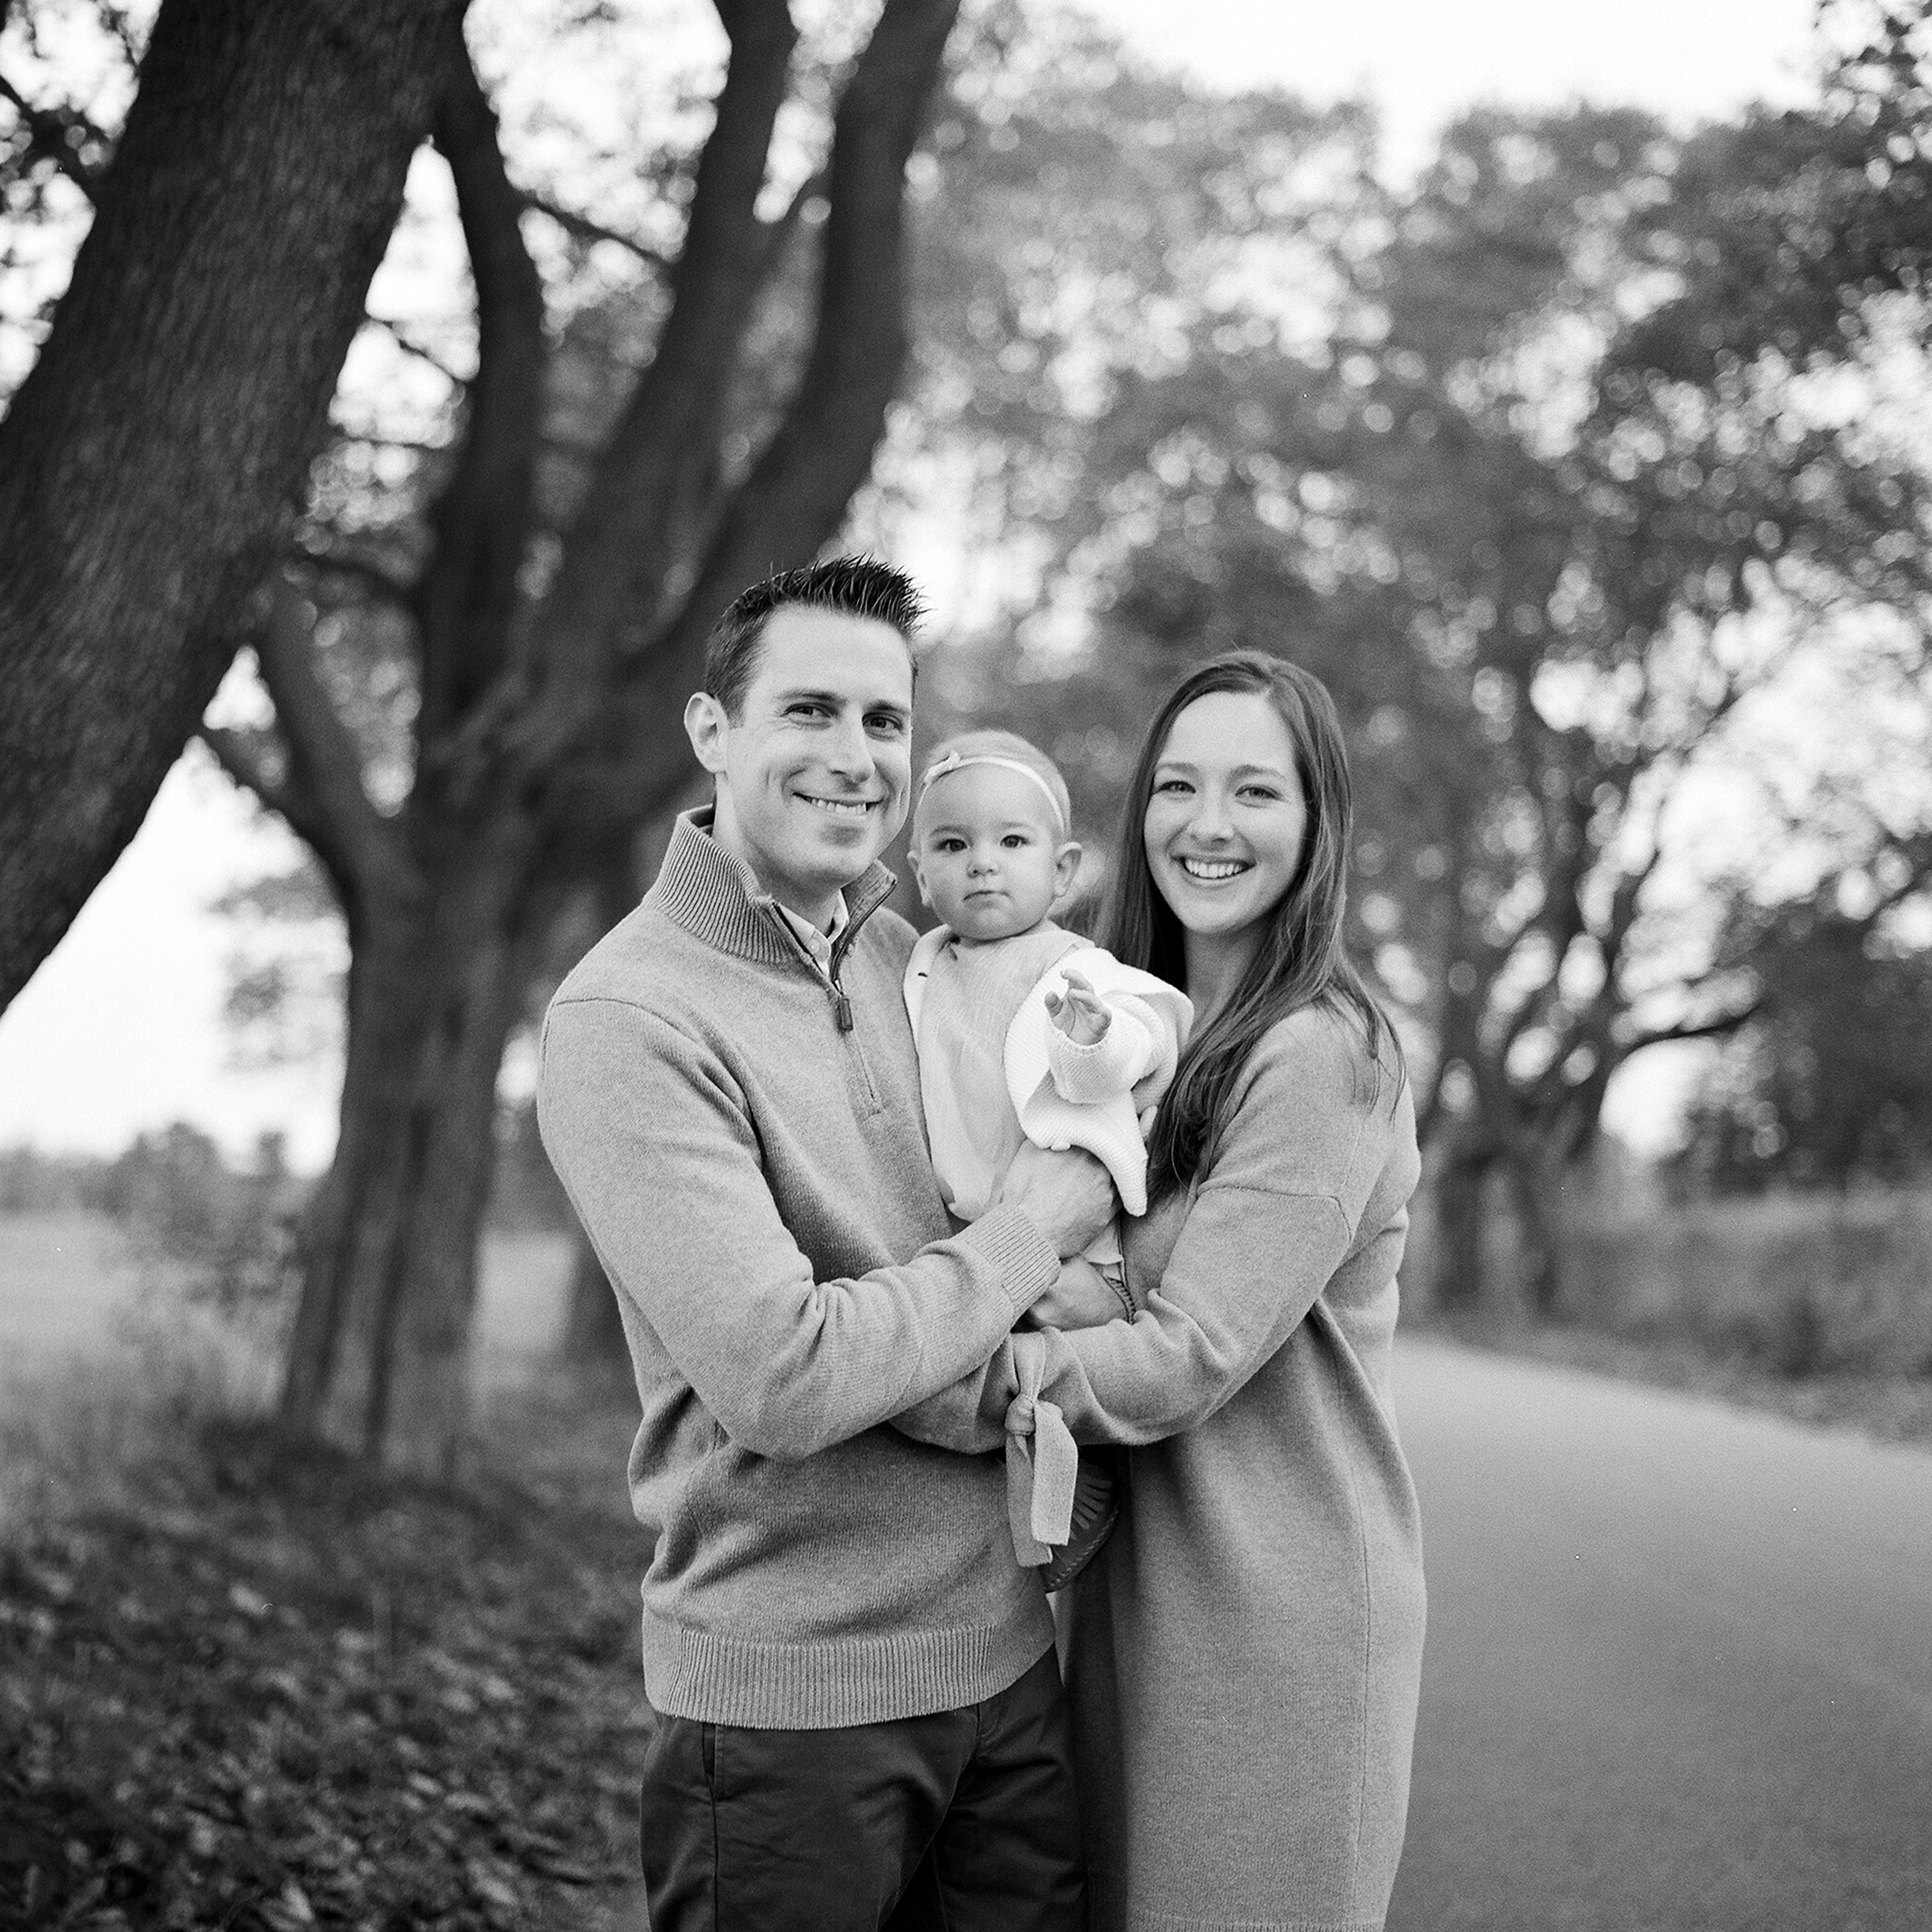 Pittsburgh and Portland Maine Baby and Family Photographer, https://www.tiffanyfarley.com